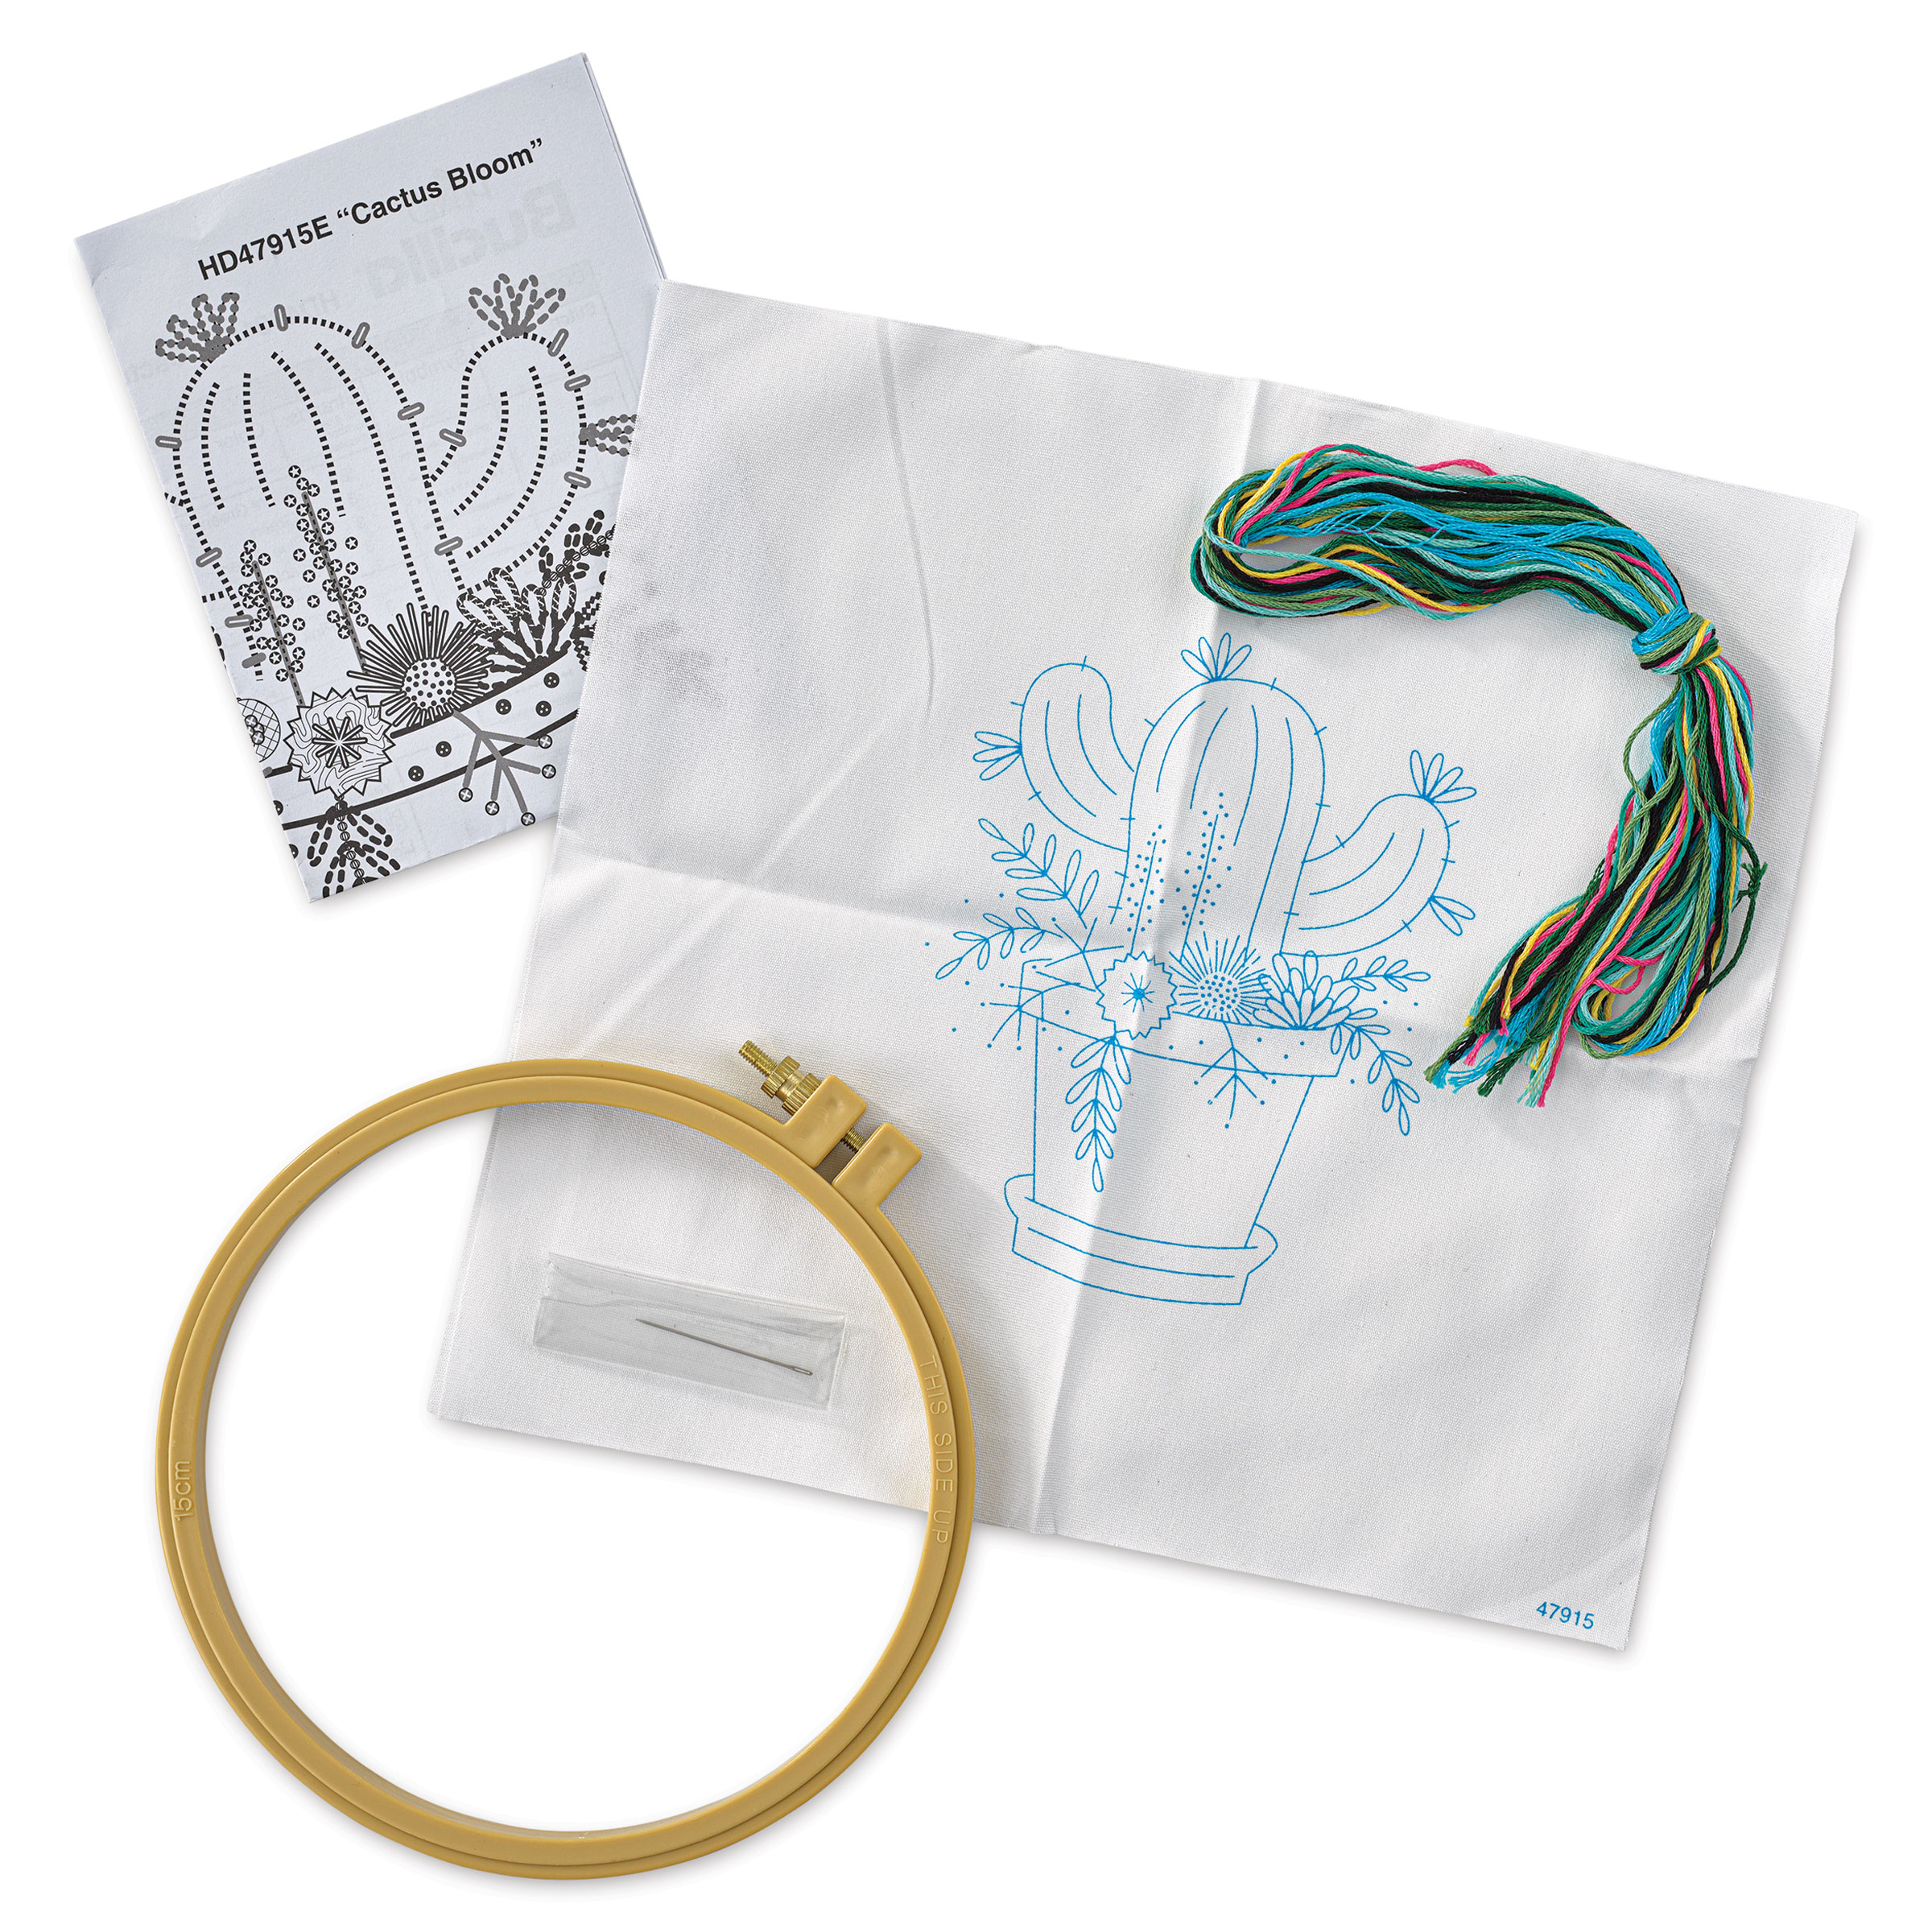 Bucilla Cactus Bloom Stamped Embroidery Kit